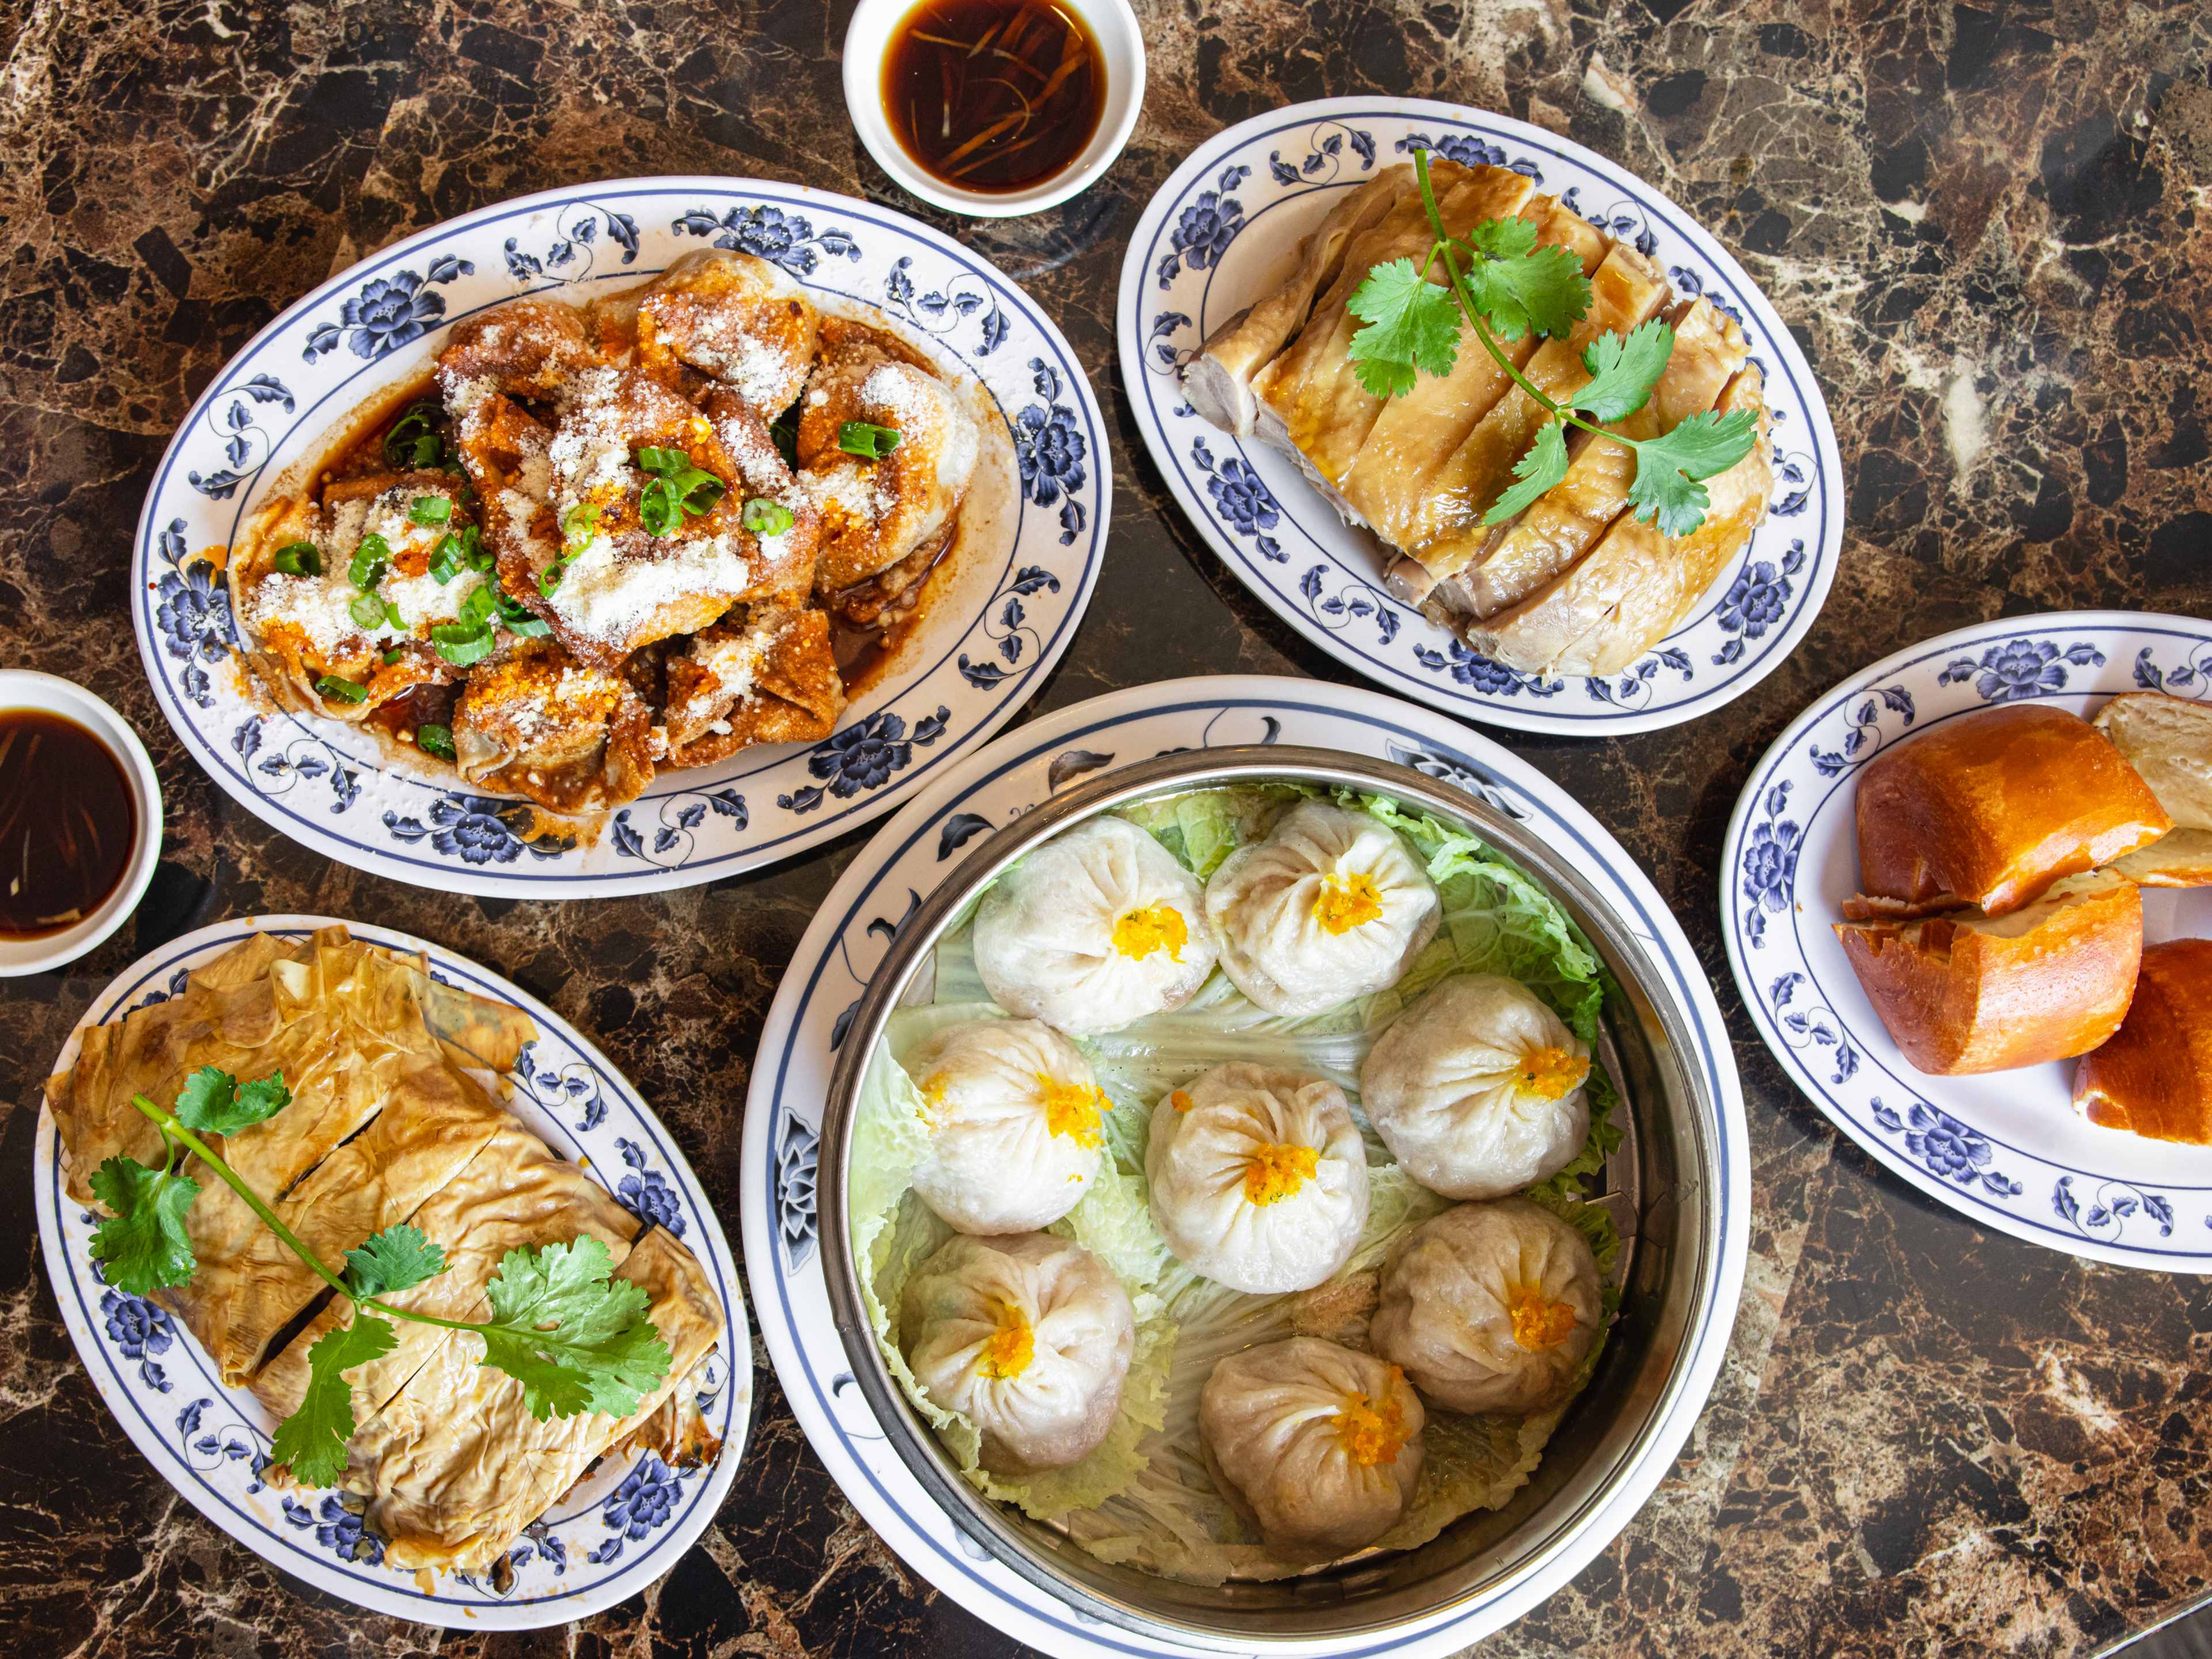 The Best Chinese Restaurants In NYC image